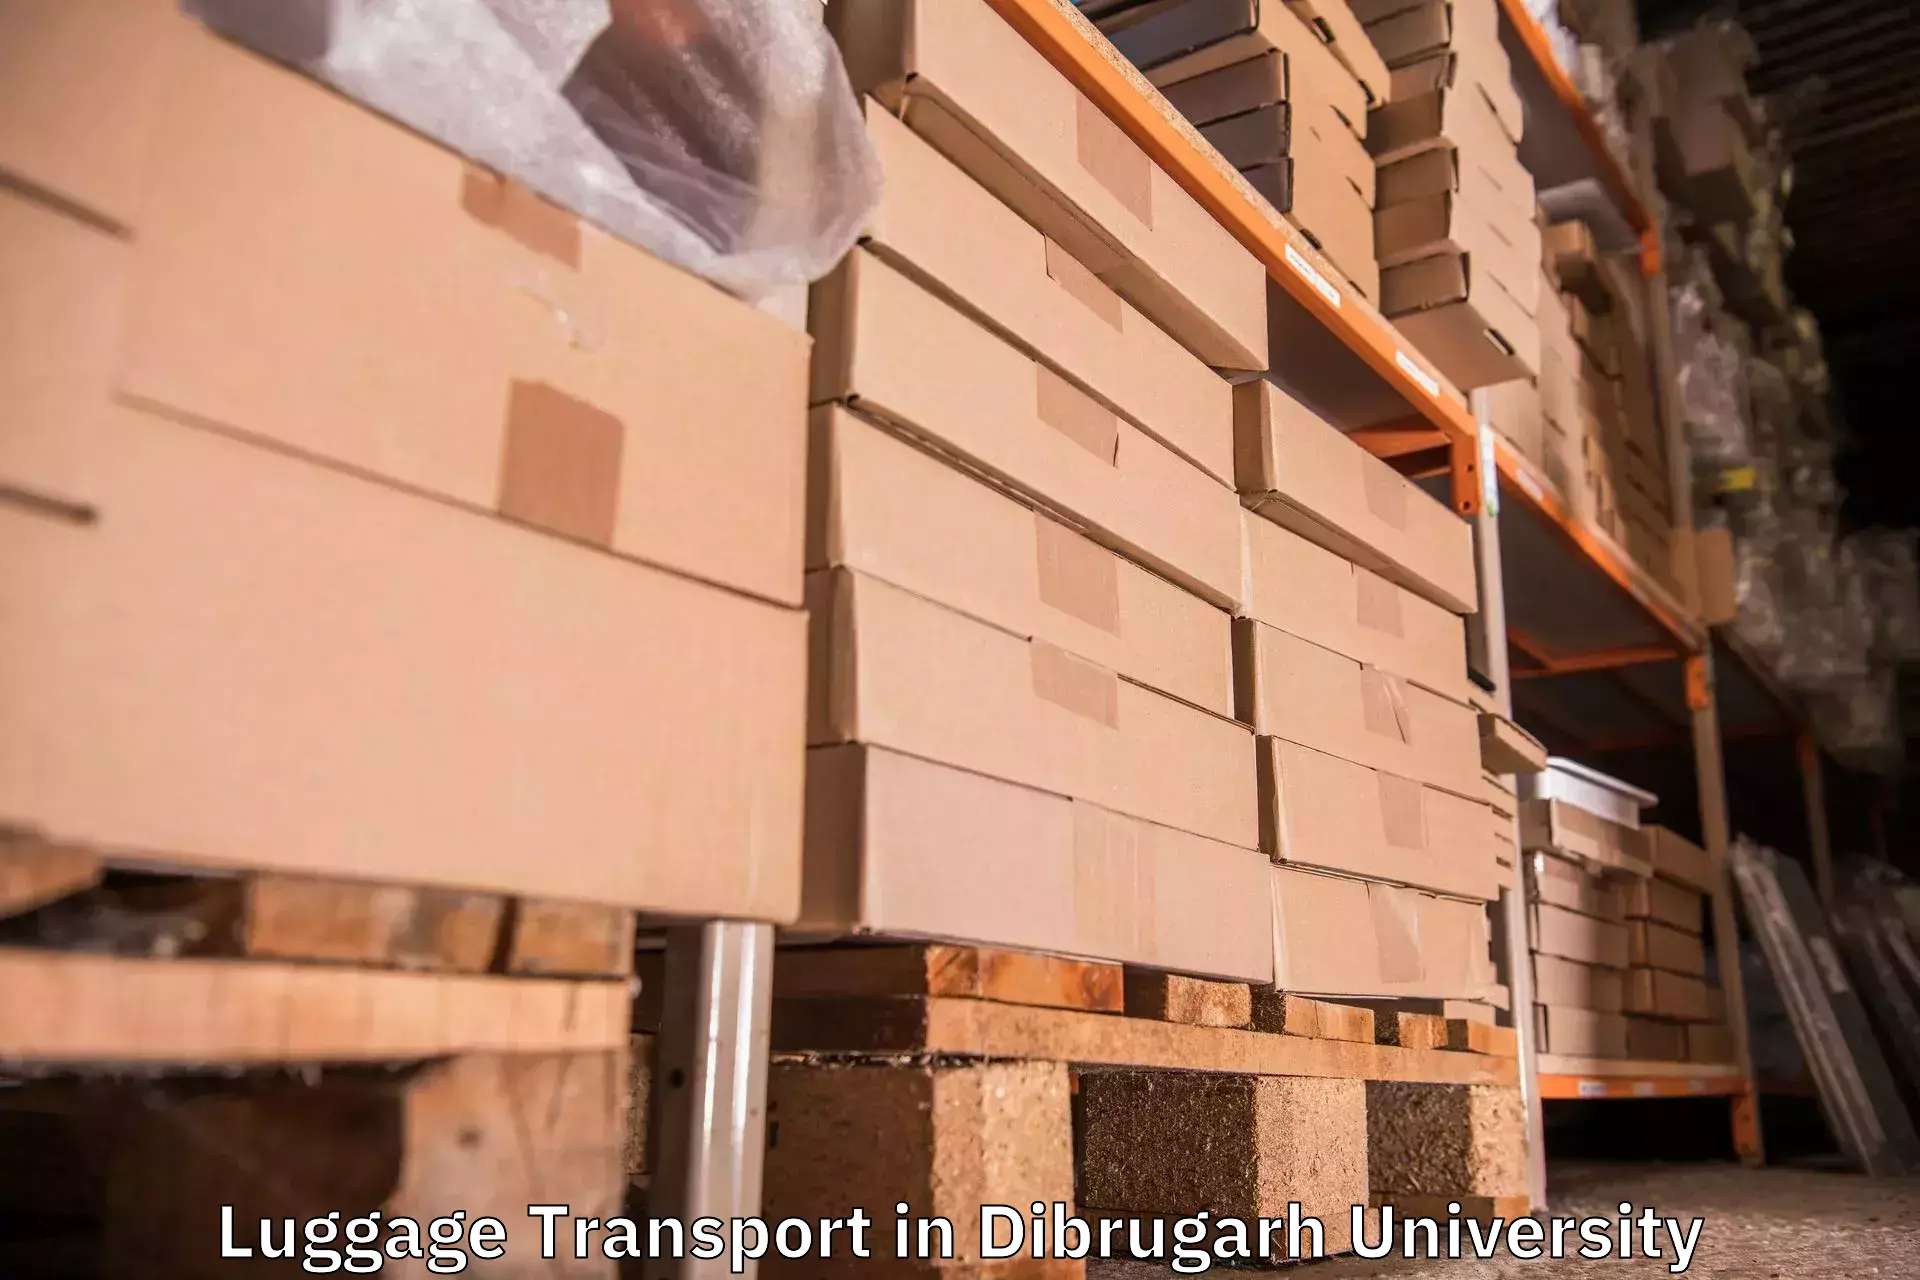 Luggage storage and delivery in Dibrugarh University